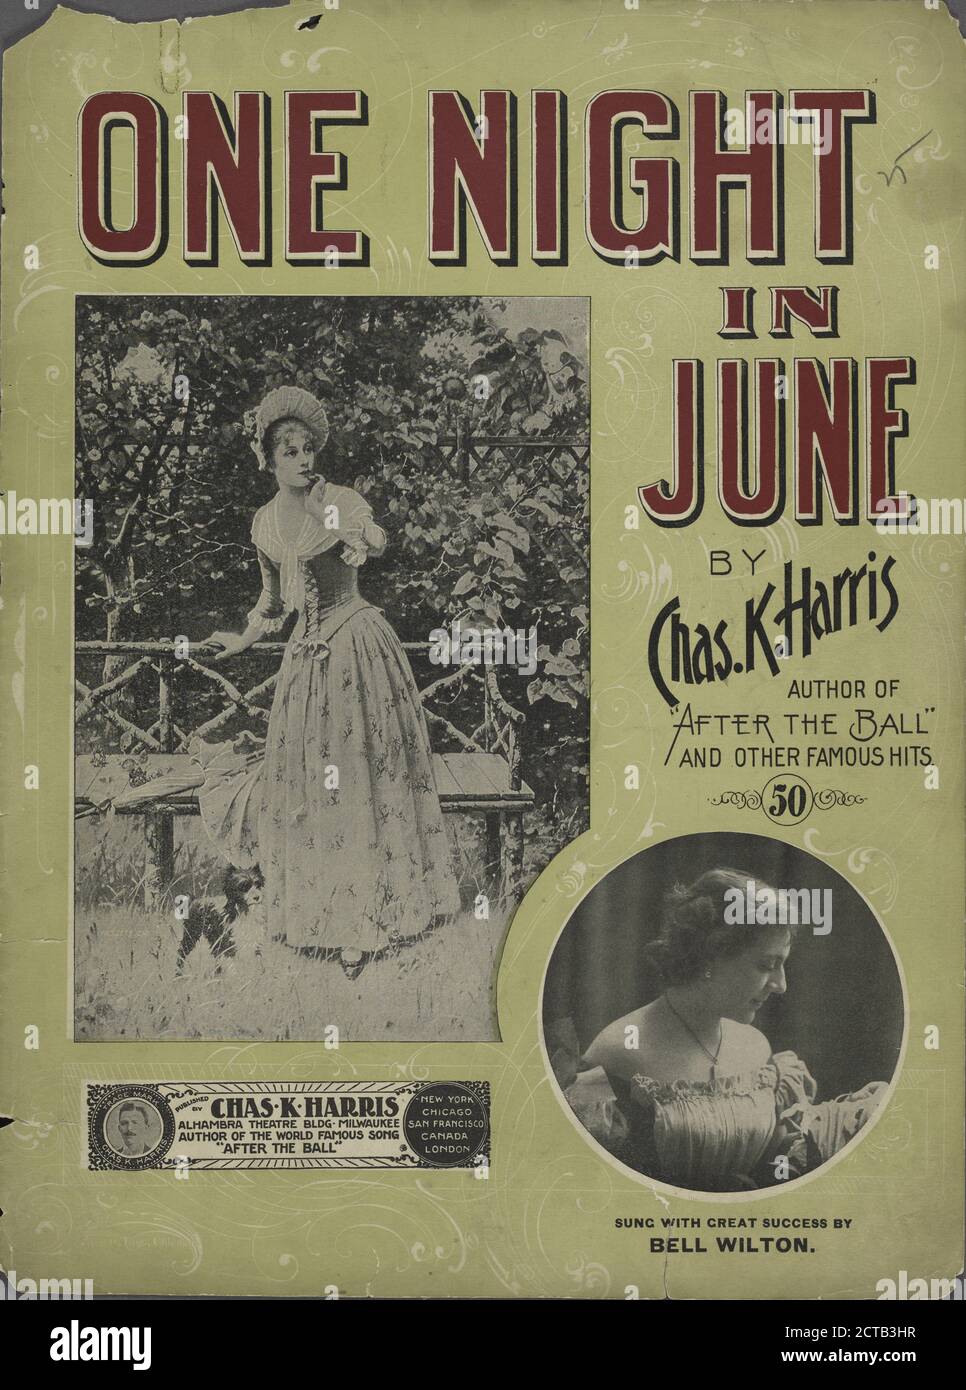 One night in June, notated music, Scores, 1899 - 1899, Harris, Chas. K. (Charles Kassell) (1864-1930), Harris, Chas. K. (Charles Kassell) (1864-1930 Stock Photo